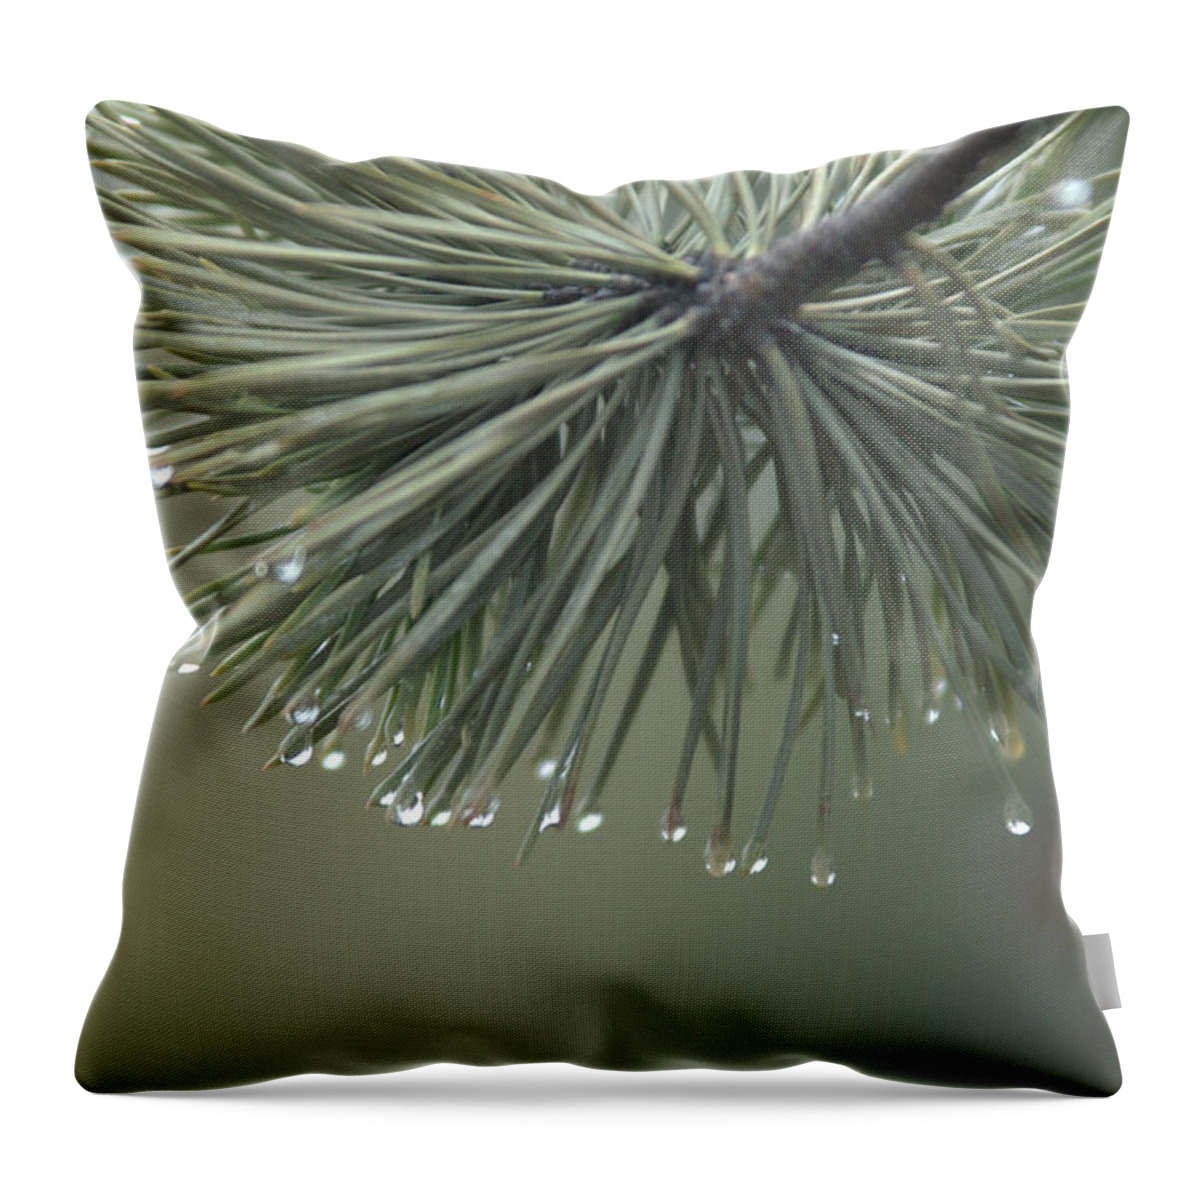 Fog Throw Pillow featuring the photograph Morning Fog by Frank Madia